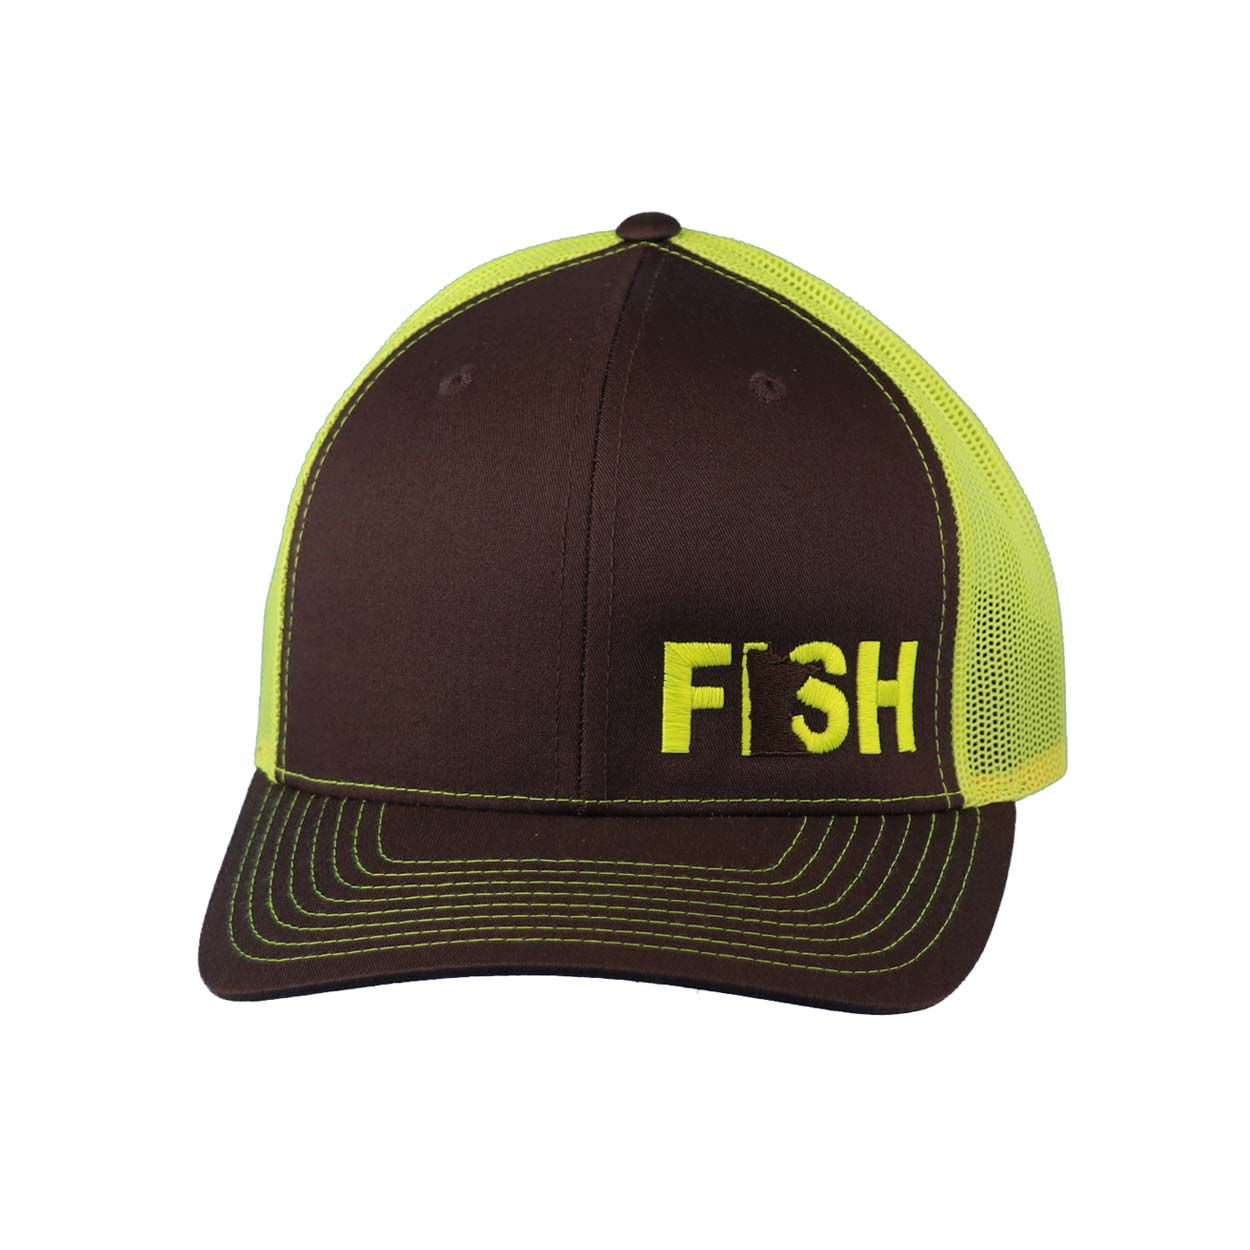 Fish Minnesota Night Out Embroidered Snapback Trucker Hat Charcoal/Neon